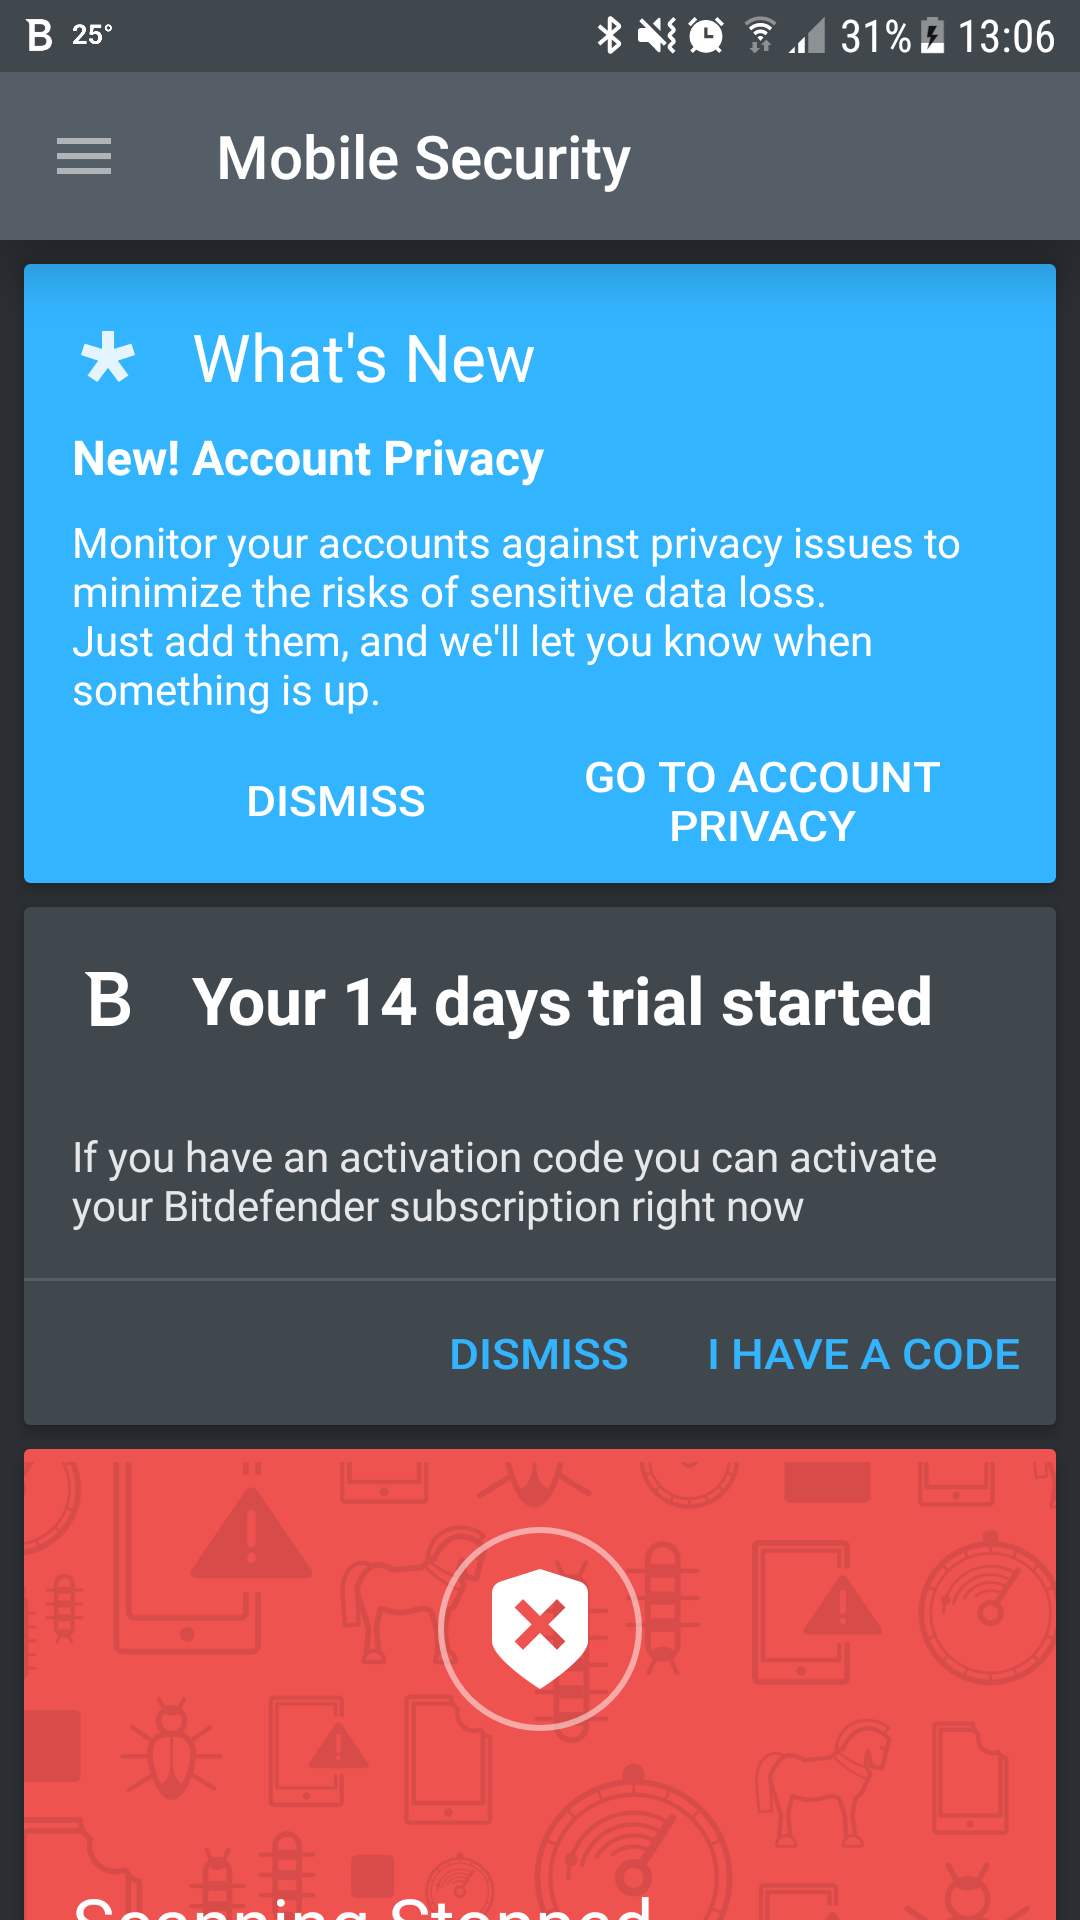 Bitdefender Mobile Security for Android Key (1 Year / 1 Device), 12.42 usd